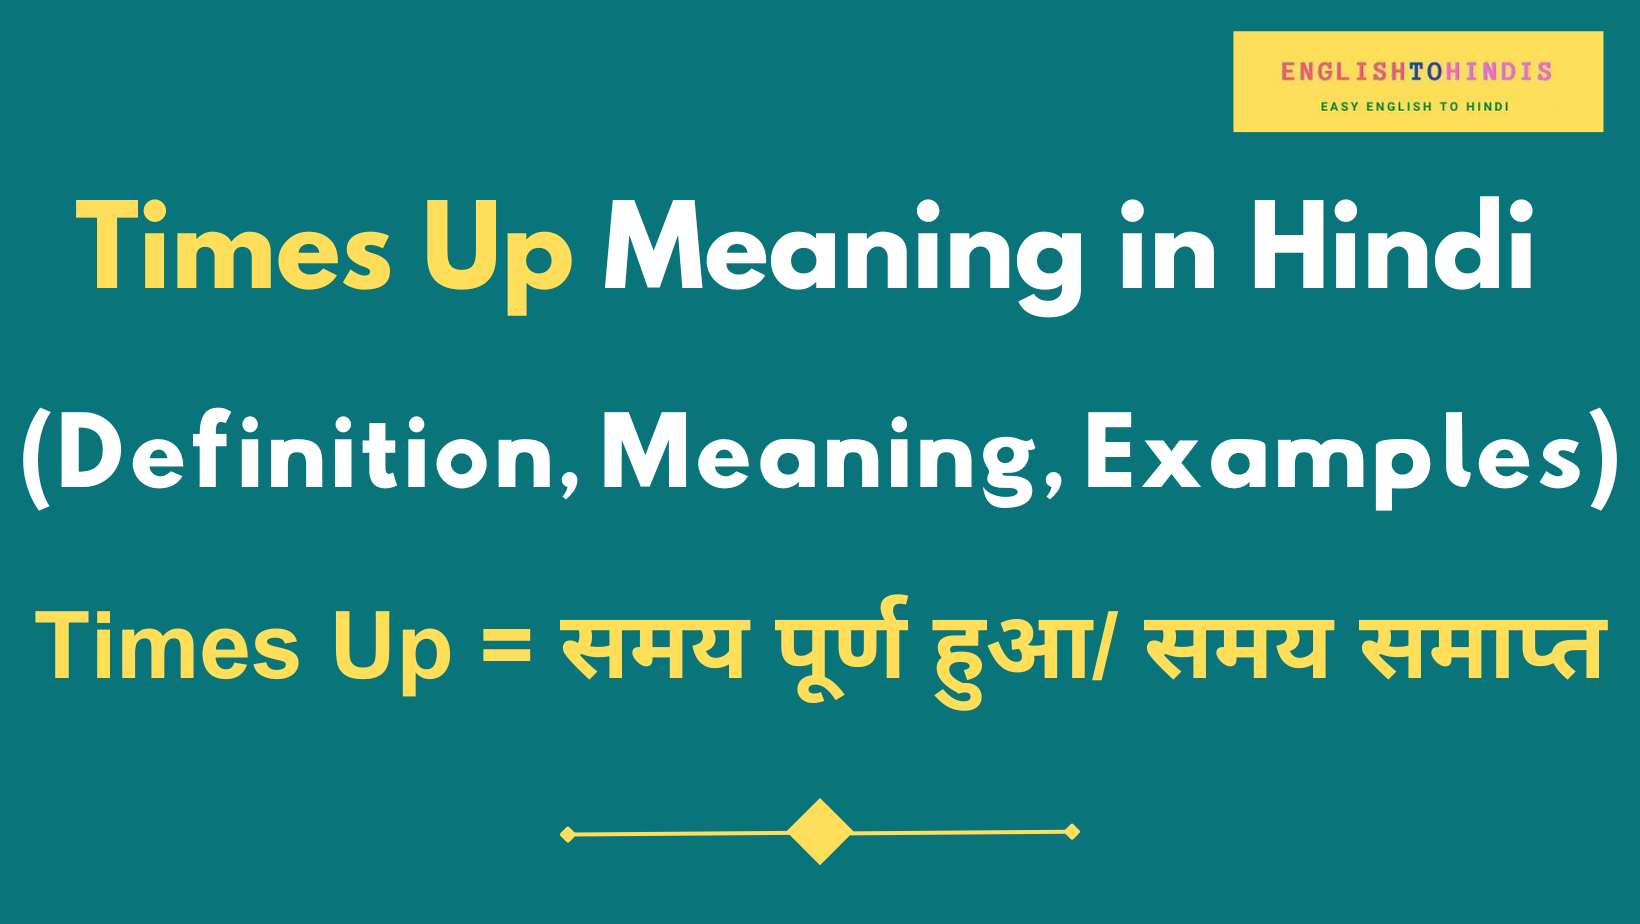 Times Up Meaning in Hindi